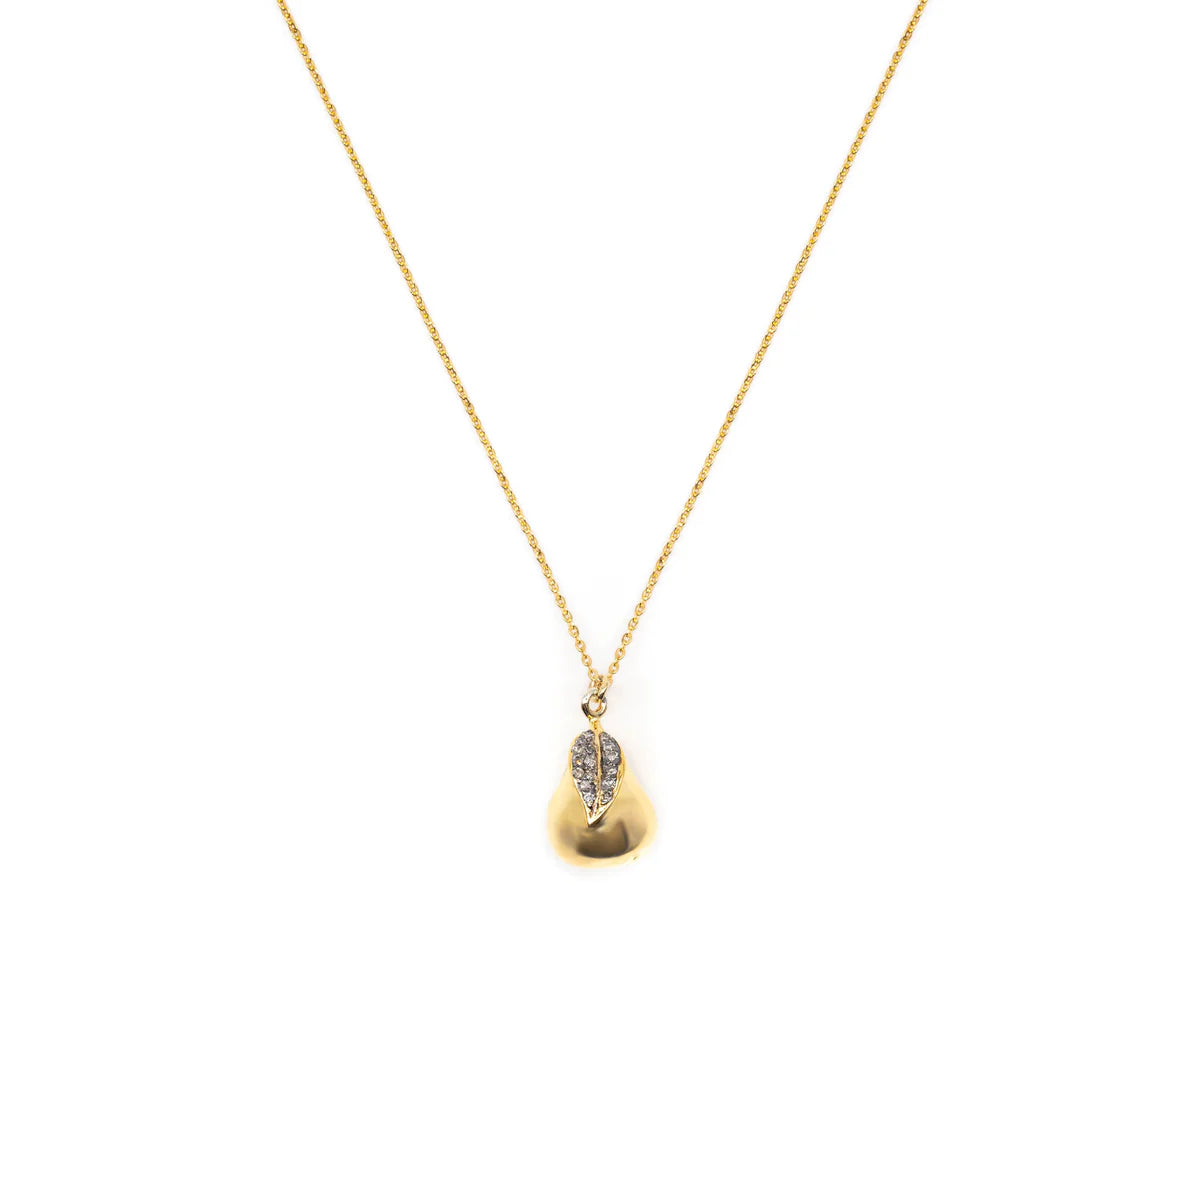 Gold pear pendant necklace on a dainty gold chain with pave diamond leaf